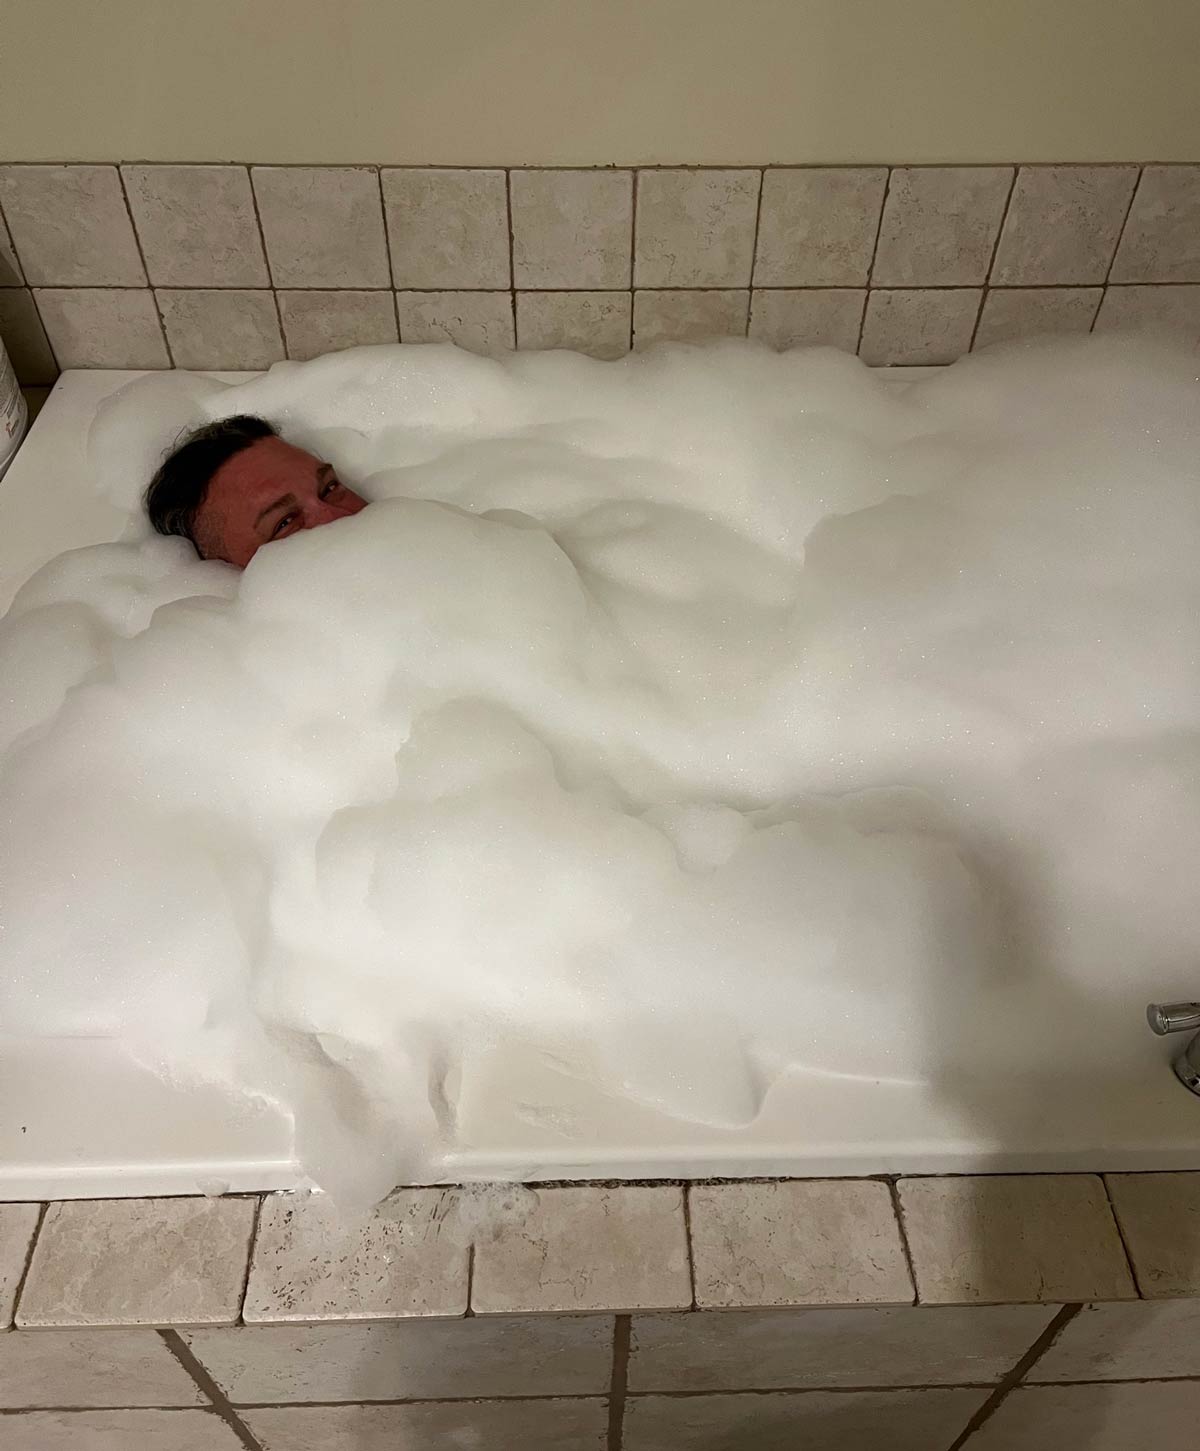 First bubble bath in nearly 35 years. I think I did something wrong?